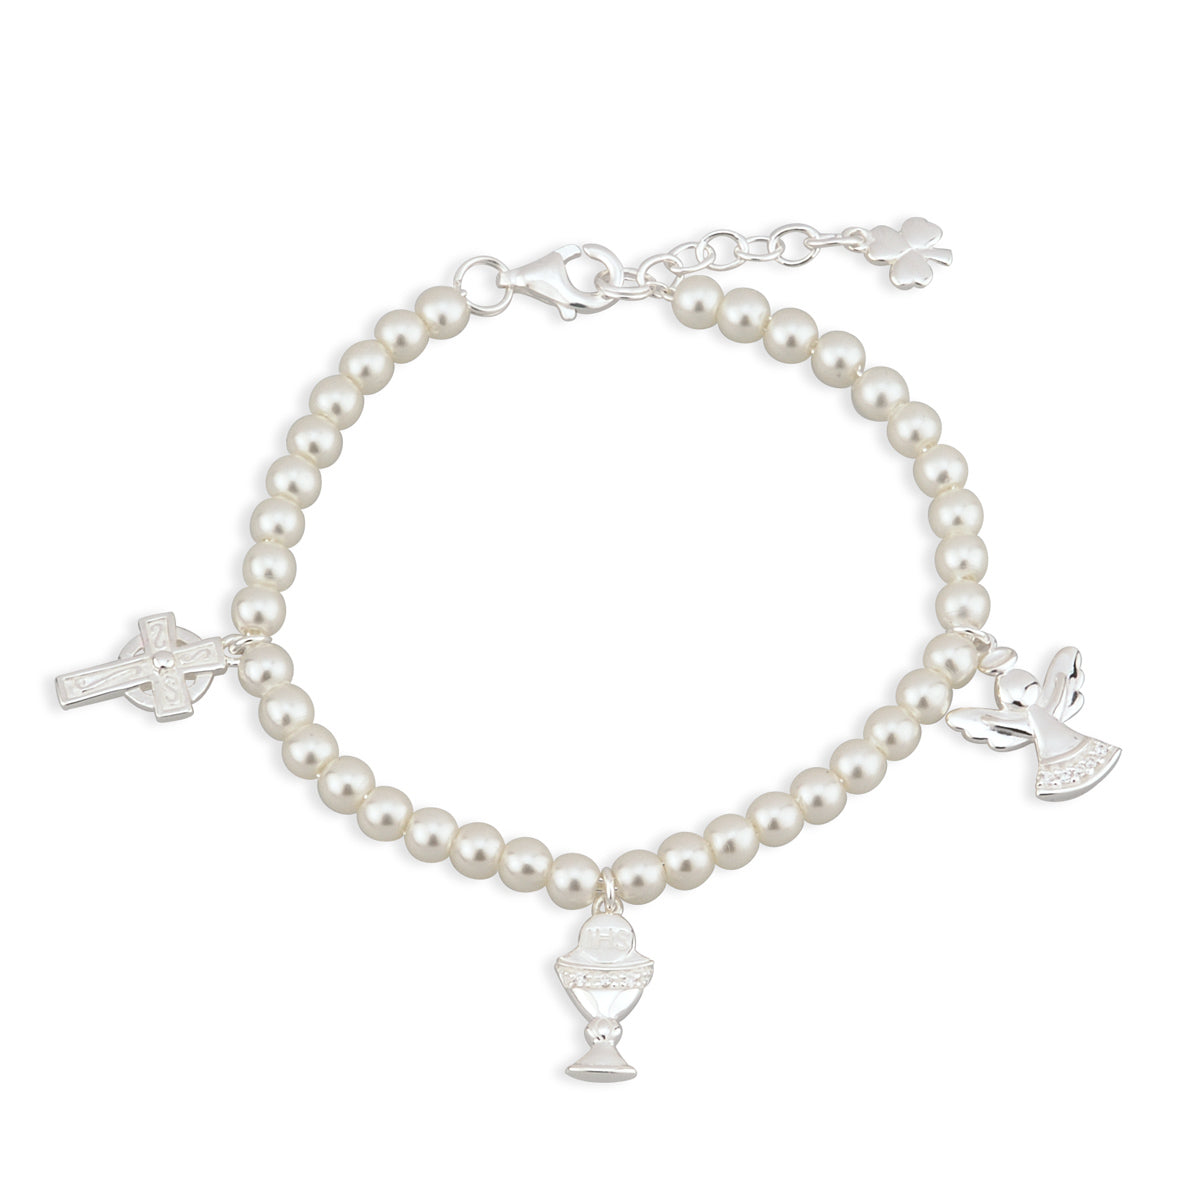 rhodium plated pearl and cross communion bracelet s5676 from Solvar